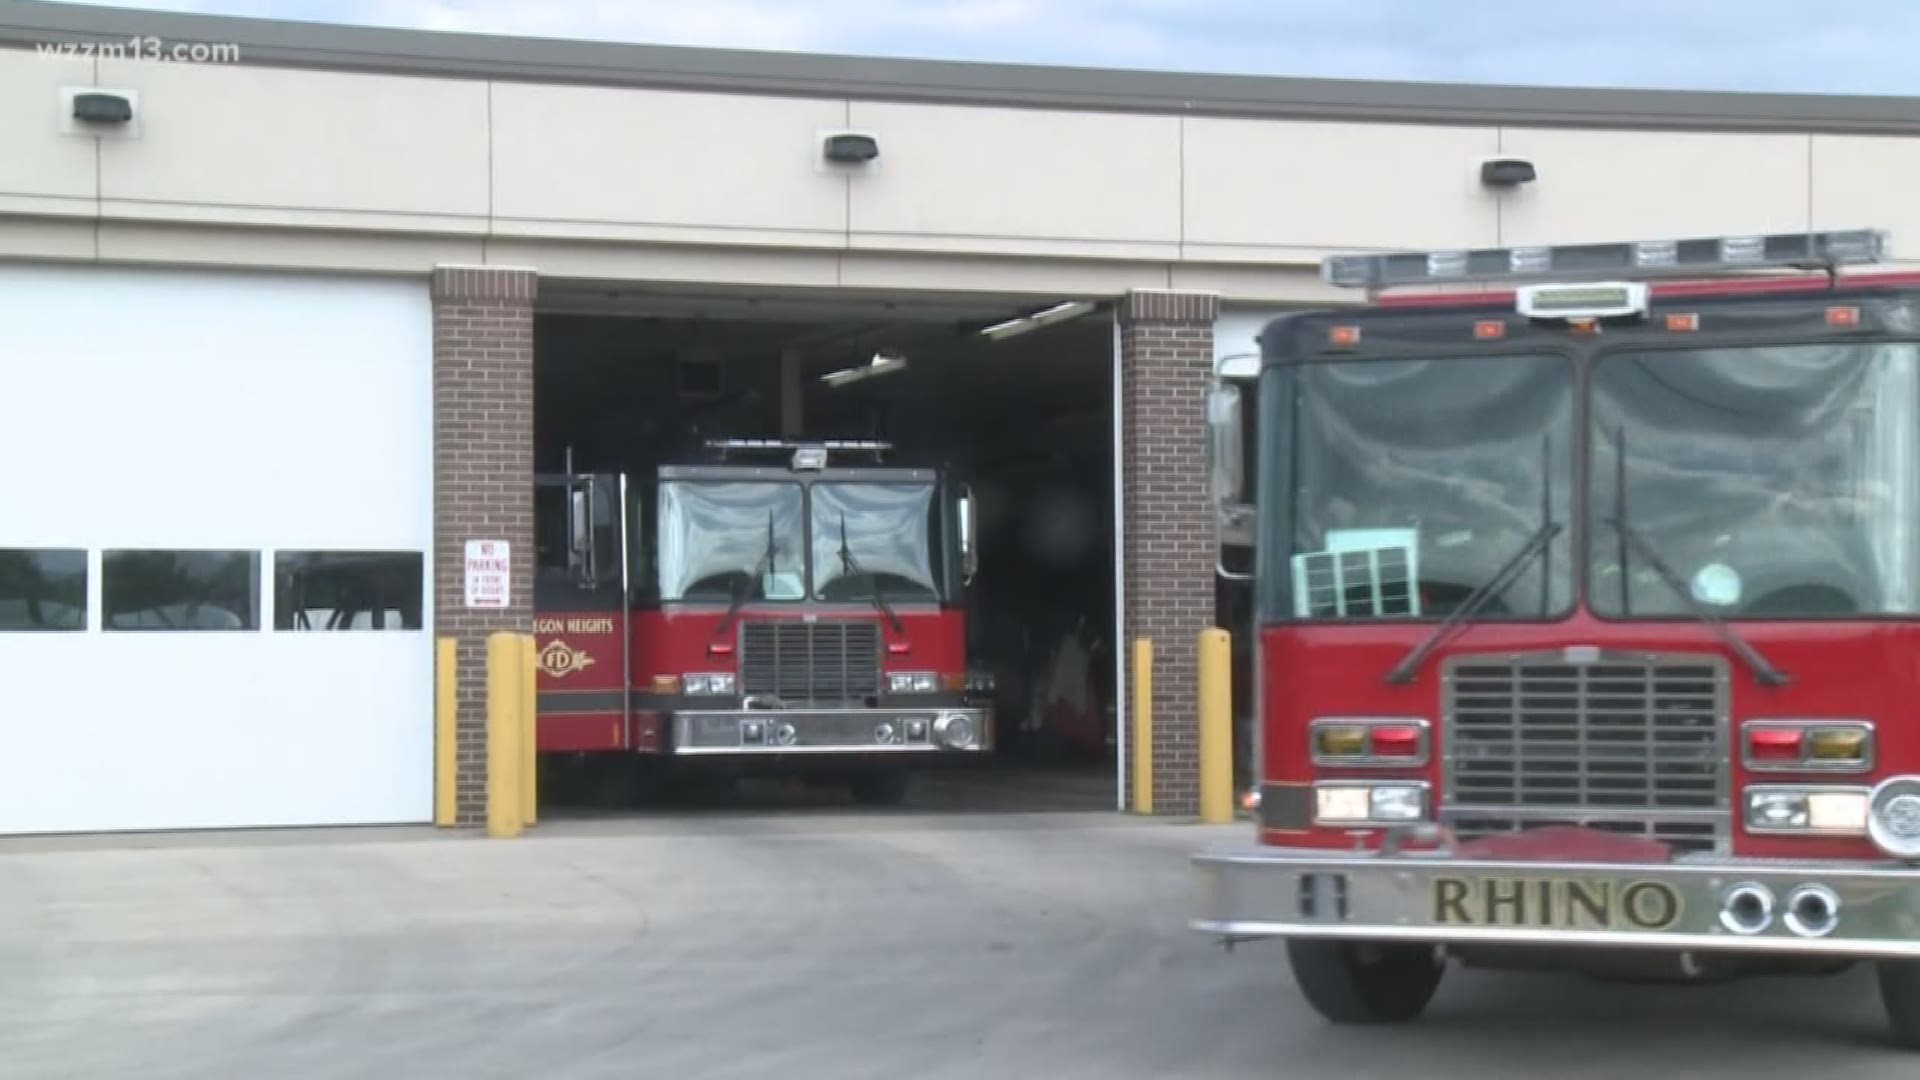 Muskegon and firefighters close to agreement